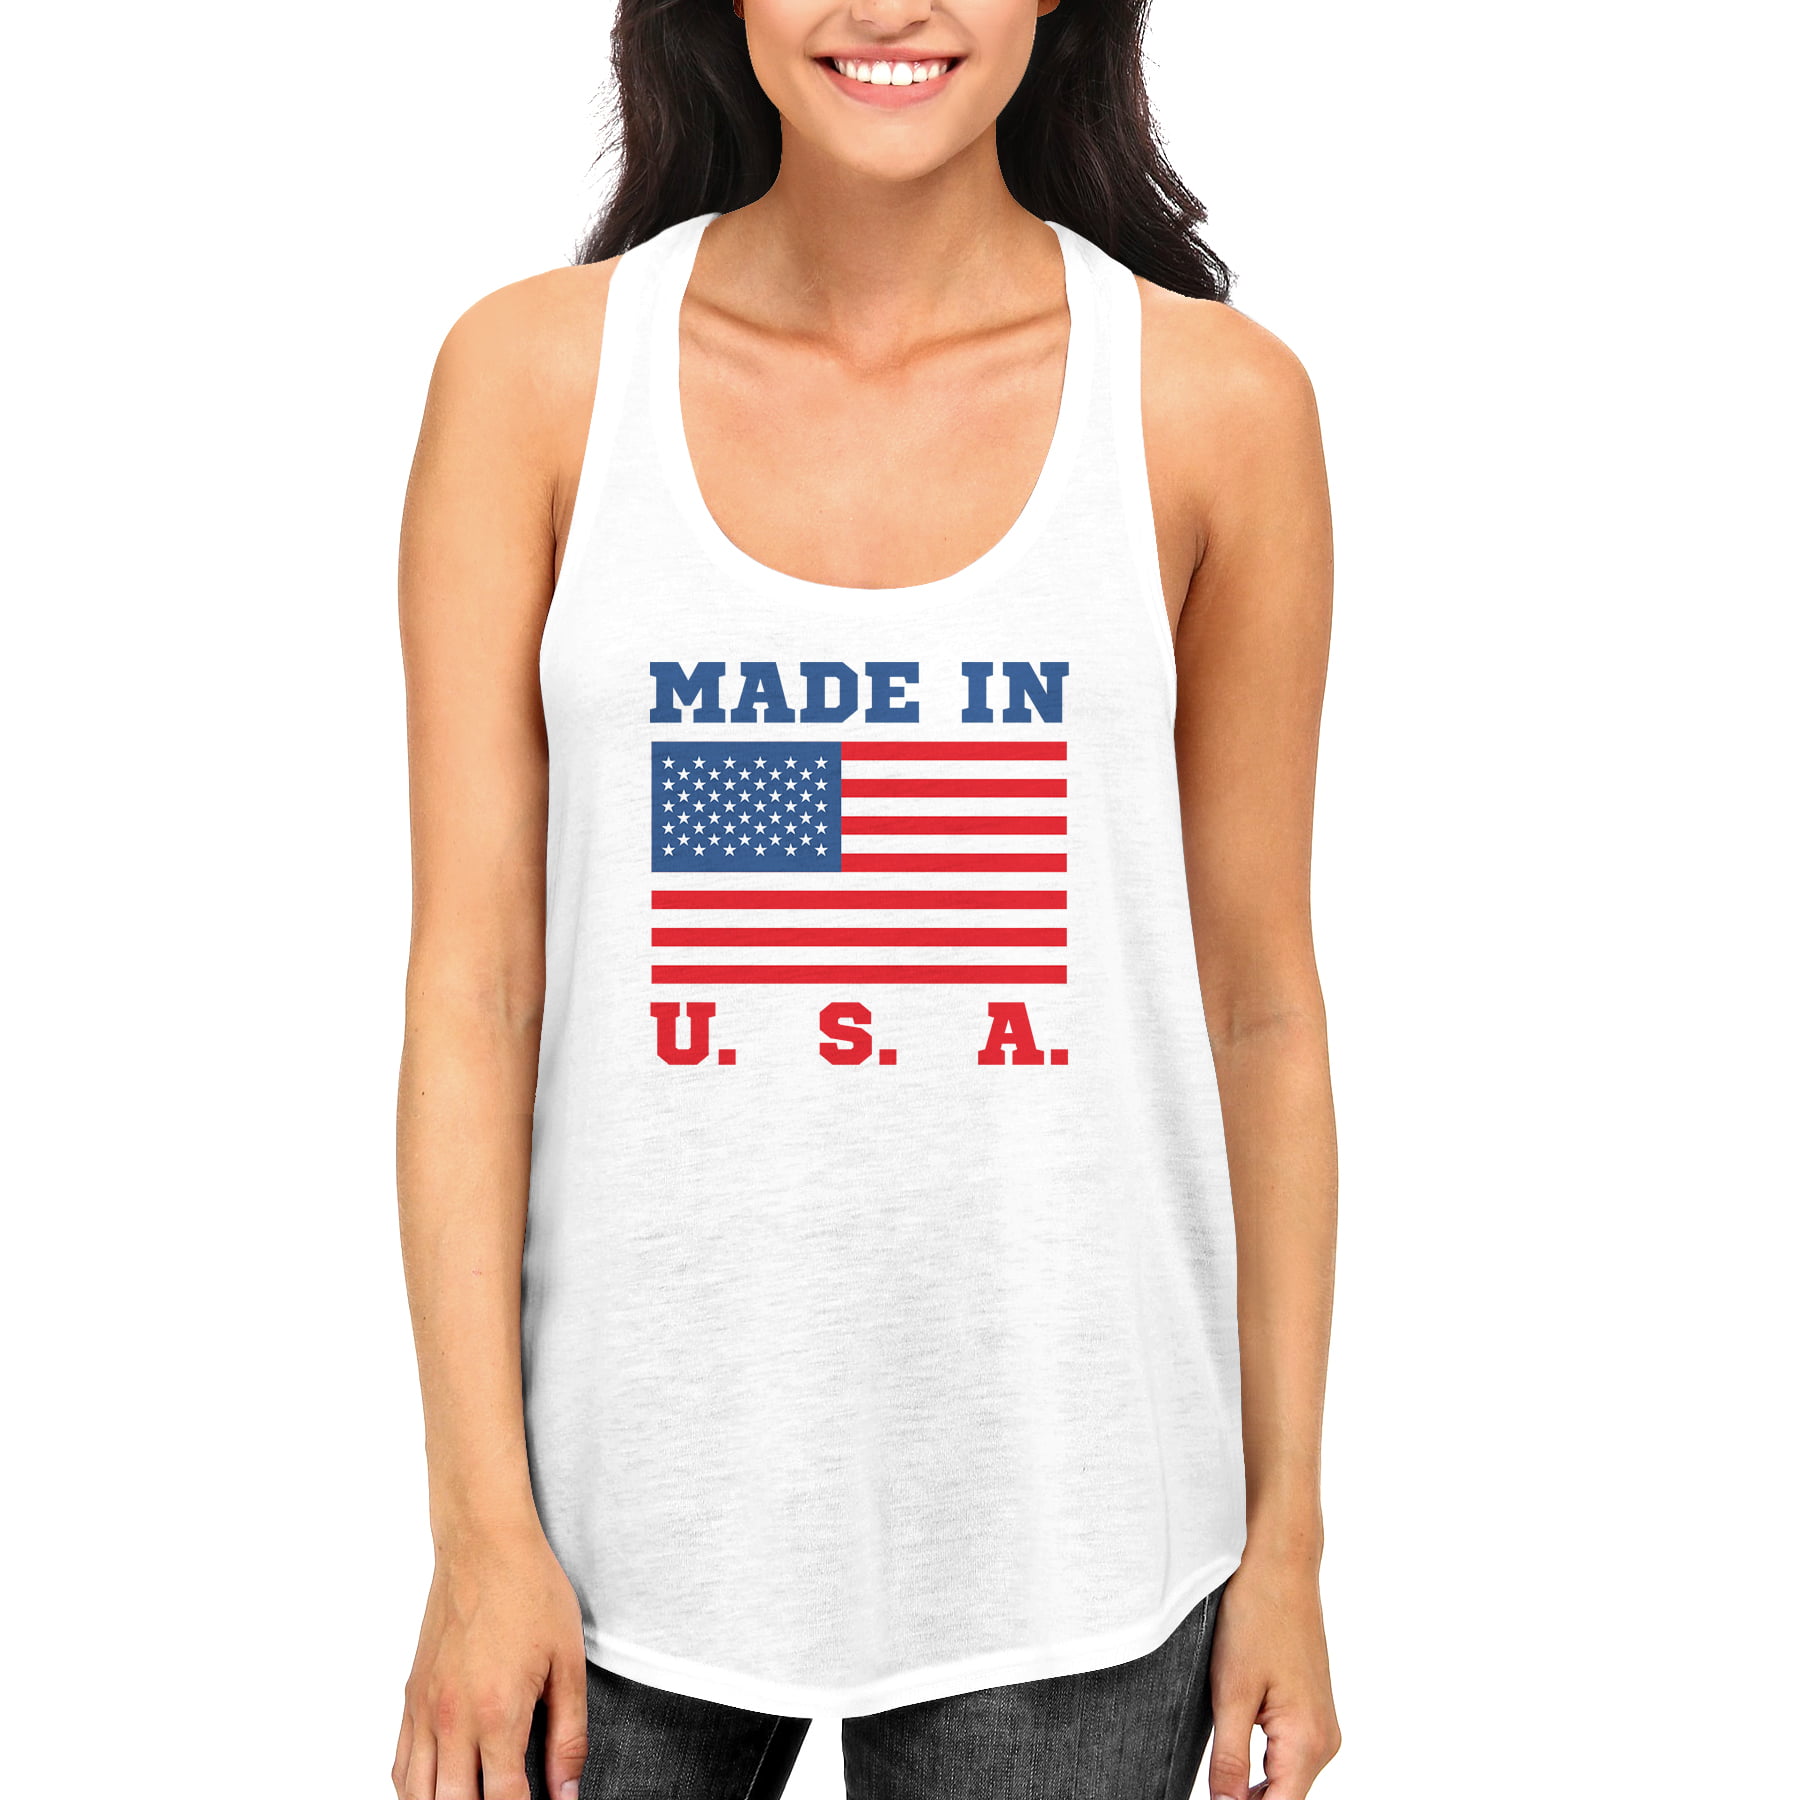 Gueuusu 4th of July Mommy and Me American Flag Striped Stars Tank Tops Cami Vest Sleeveless Shirts